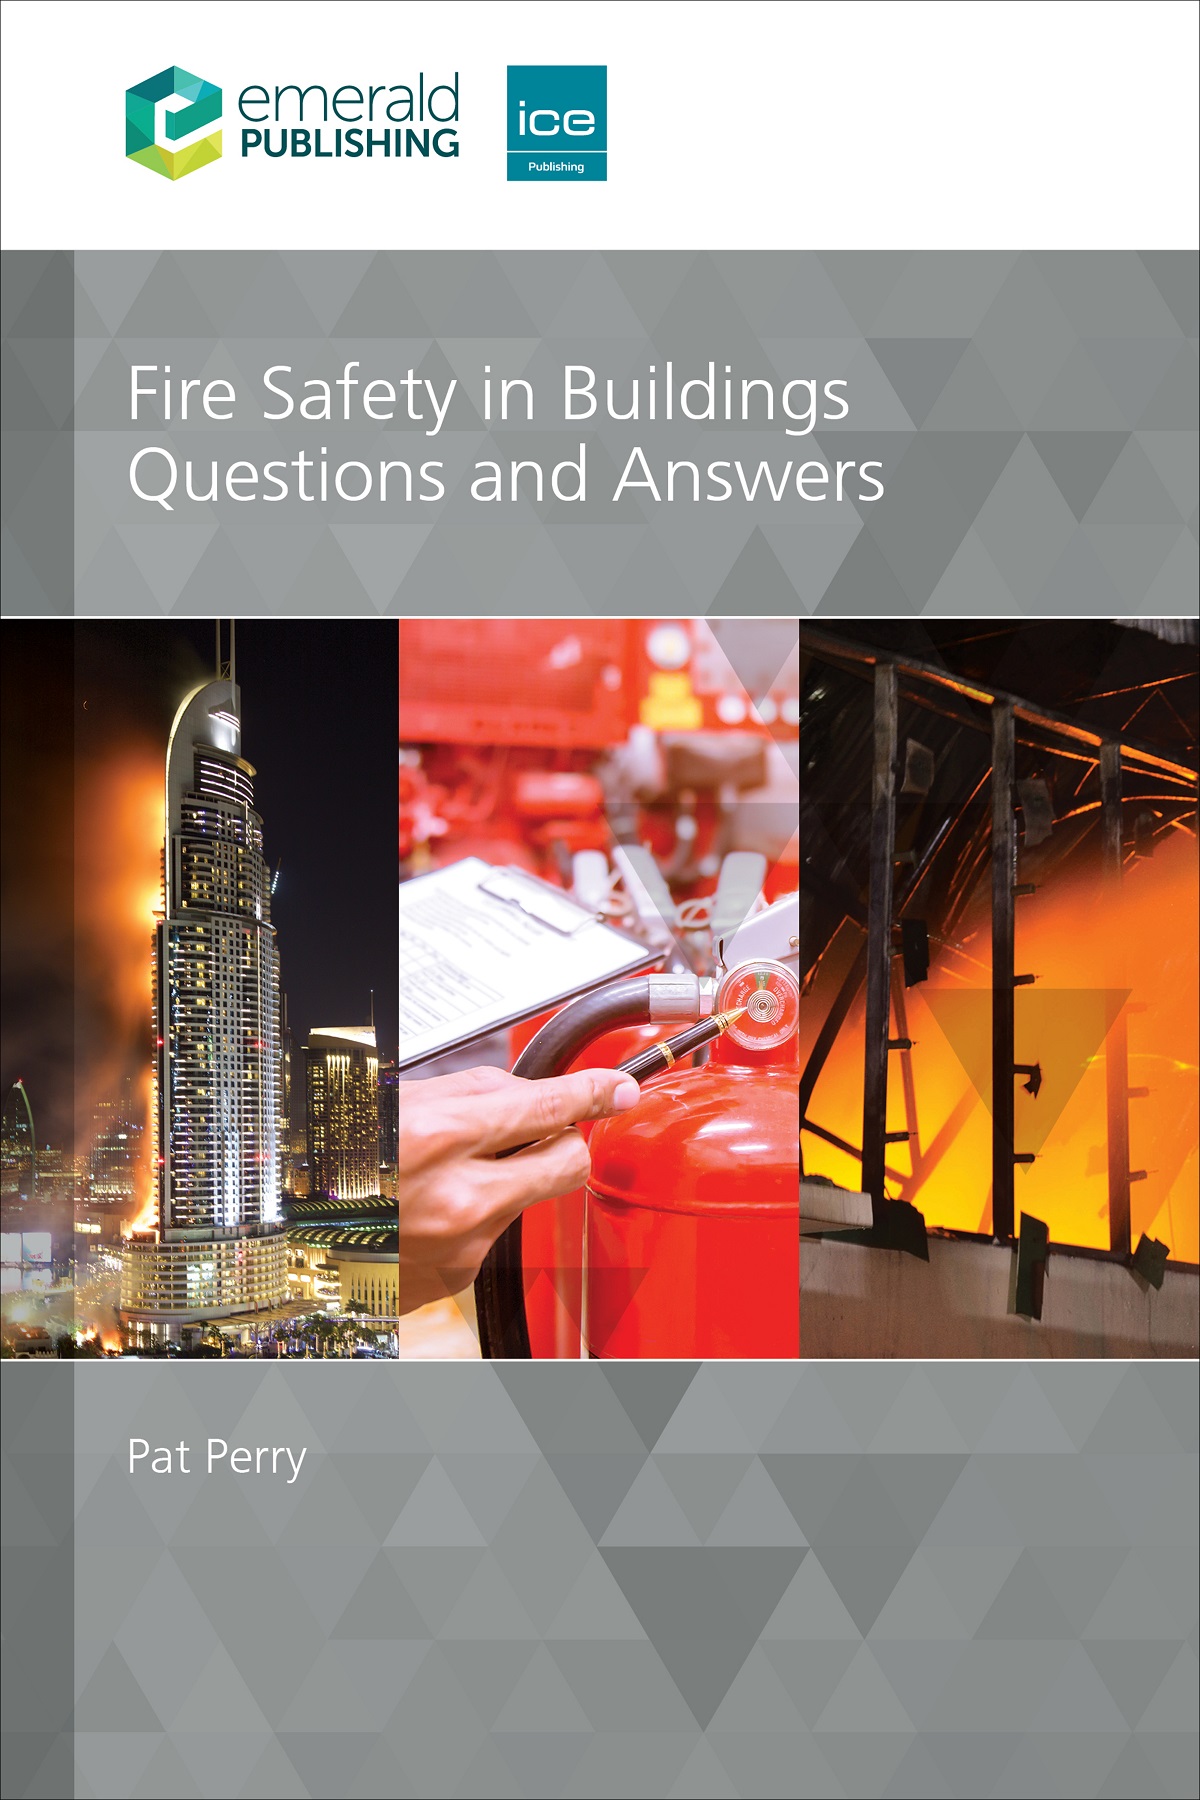 Fire Safety in Buildings: Questions and Answers